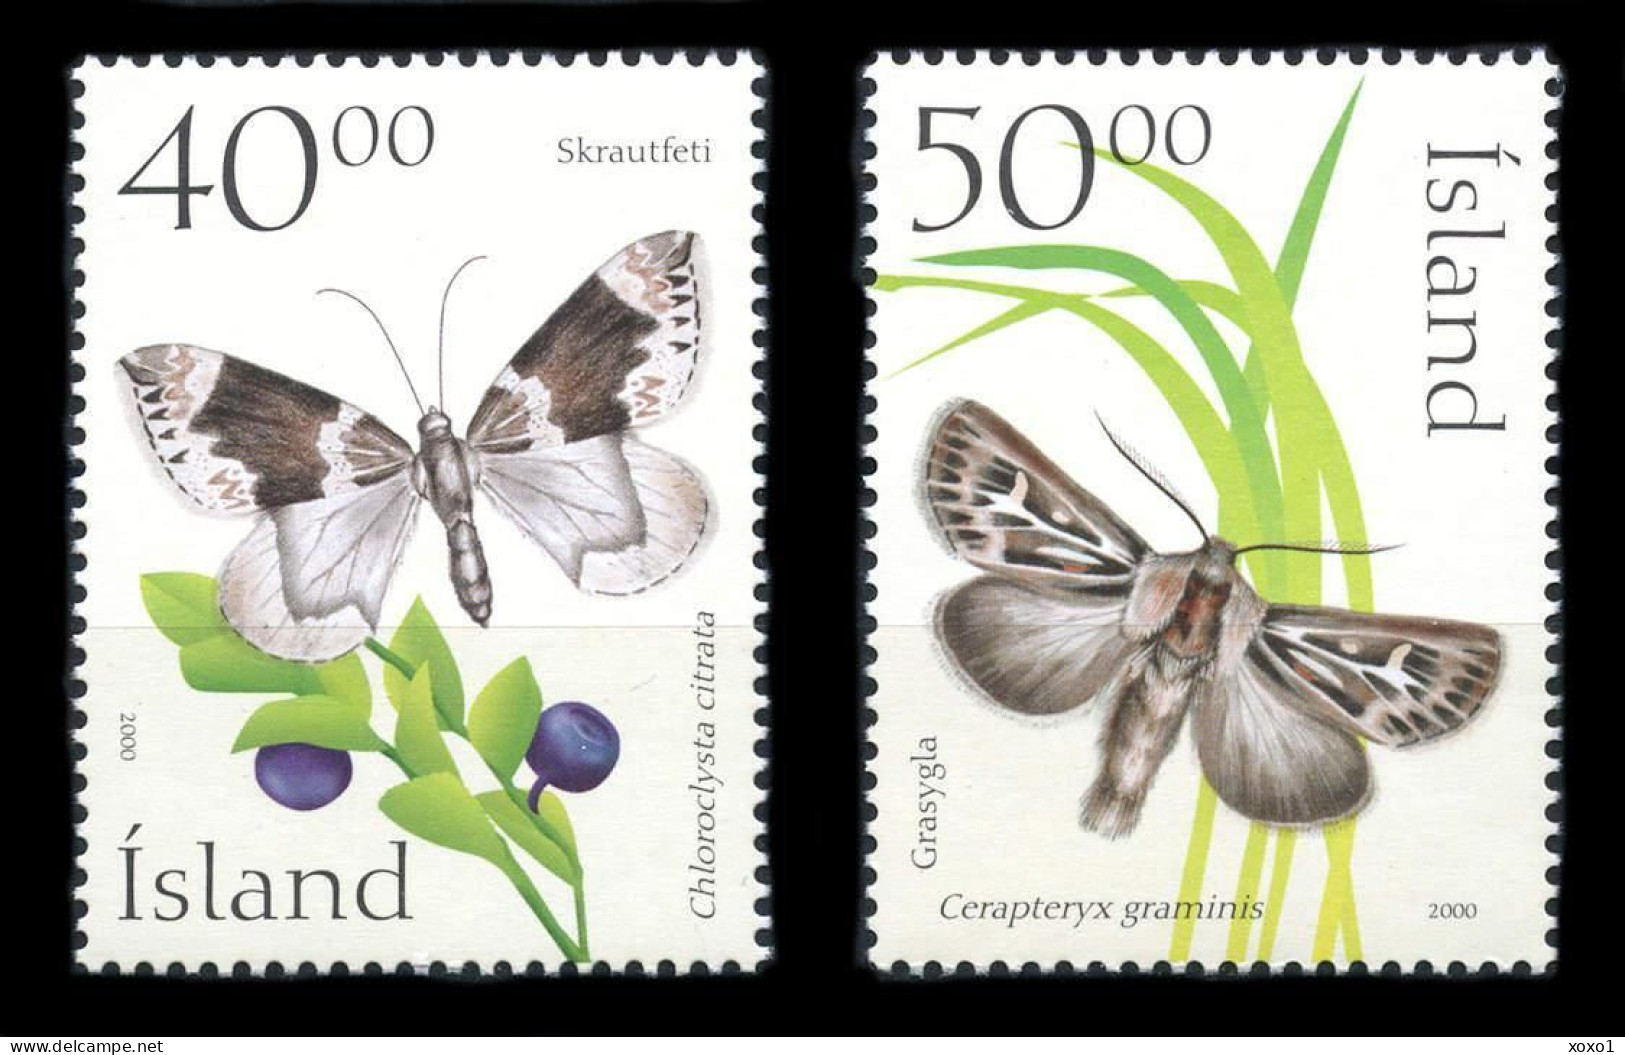 Iceland 2000 MiNr. 963 - 964 Island  Insects, Butterflies  2v  MNH**  3.00 € - Schmetterlinge